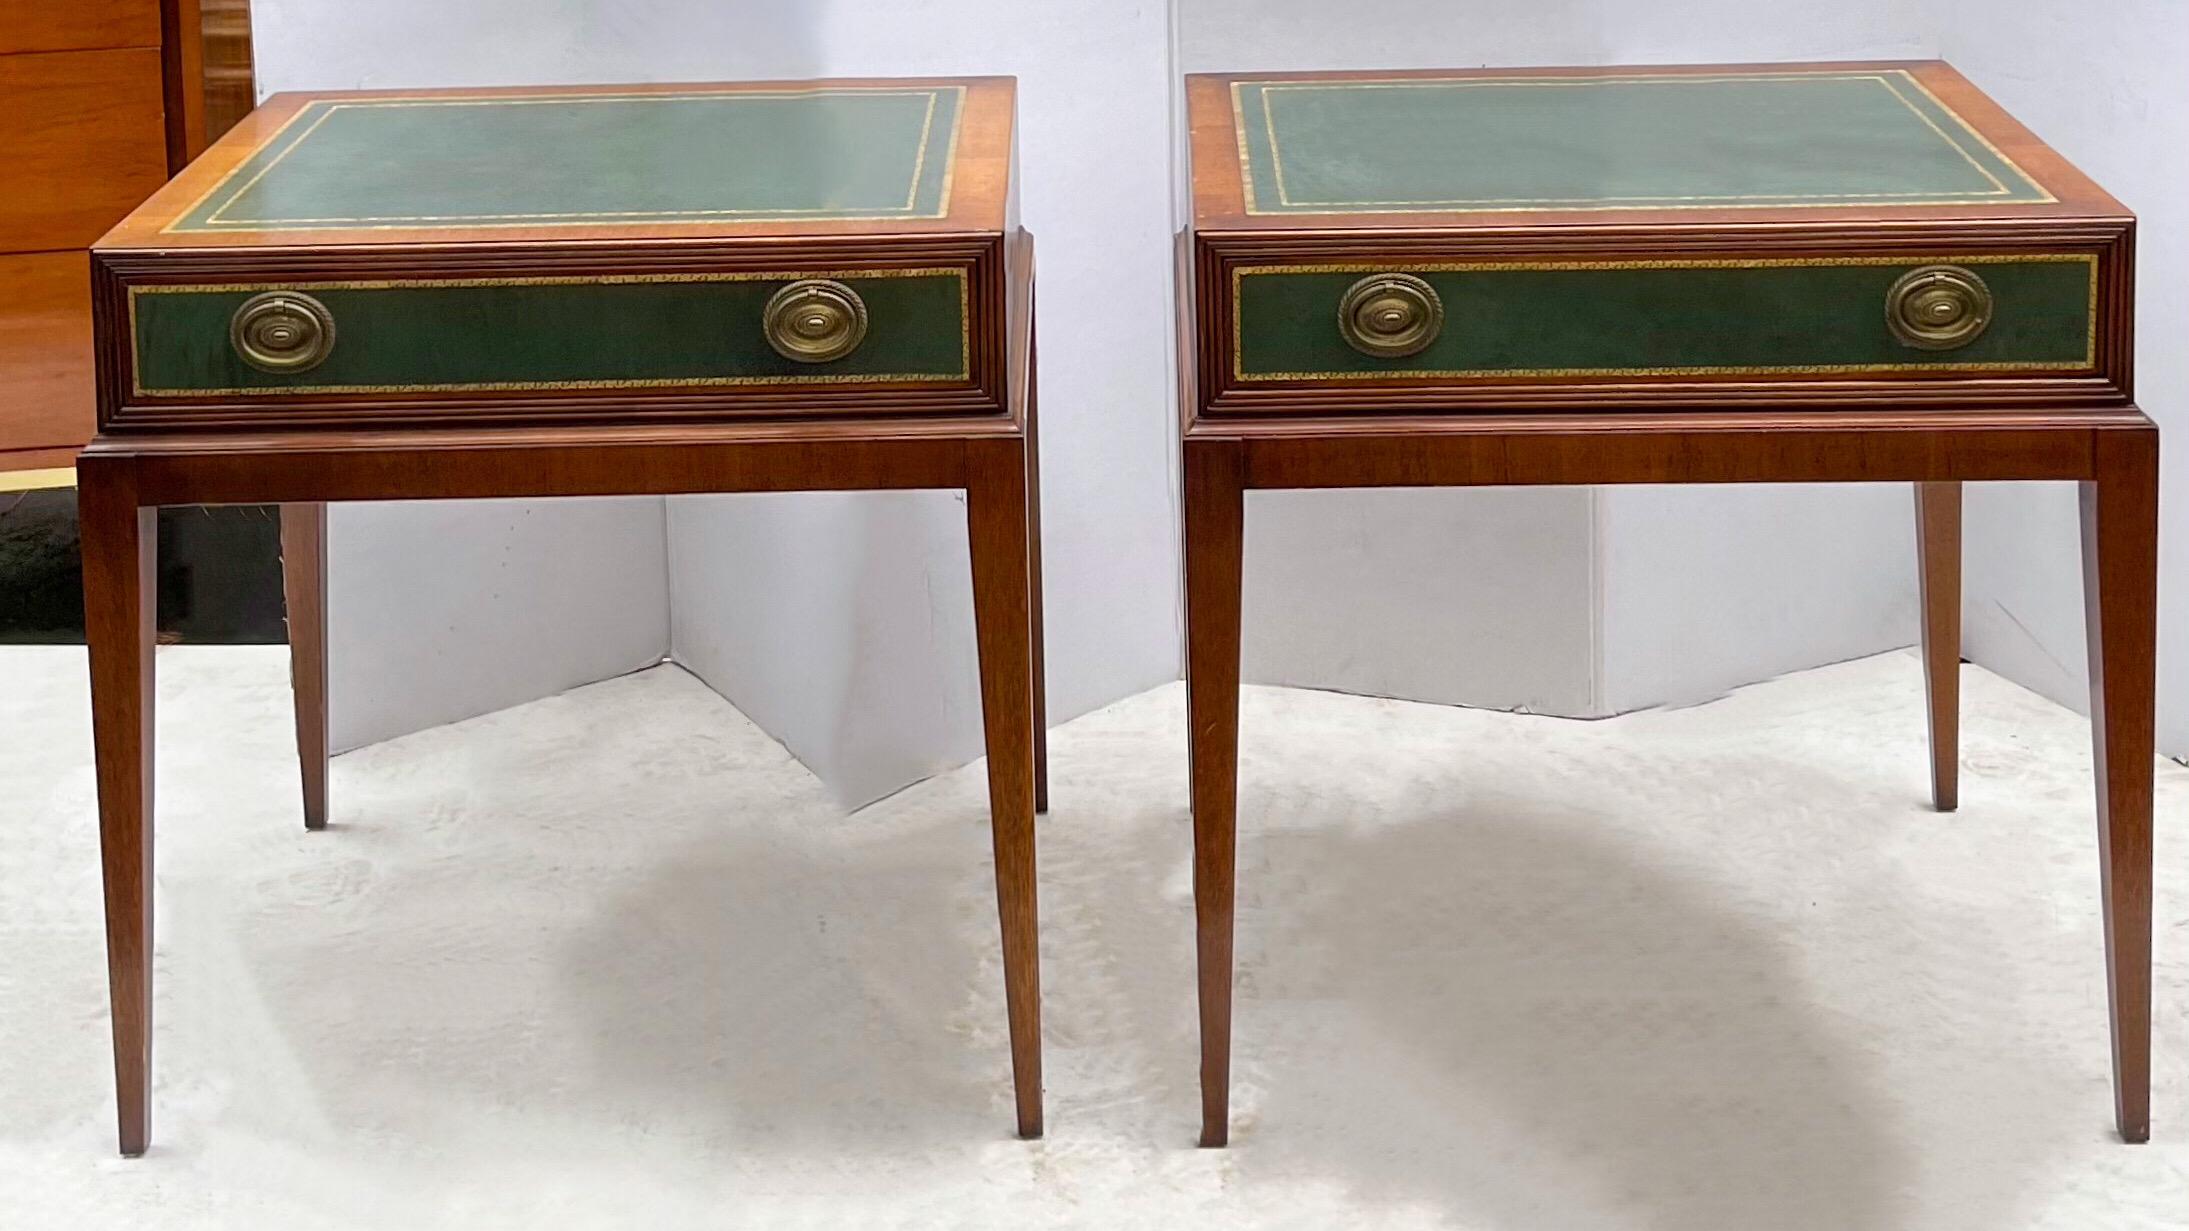 This is a pair of good looking green tooled leather side tables that are in the manner of Parzinger for Charak. They have green tooled leather surfaces and original hardware, but the clean lines and tapered legs really elevate the look. I did not